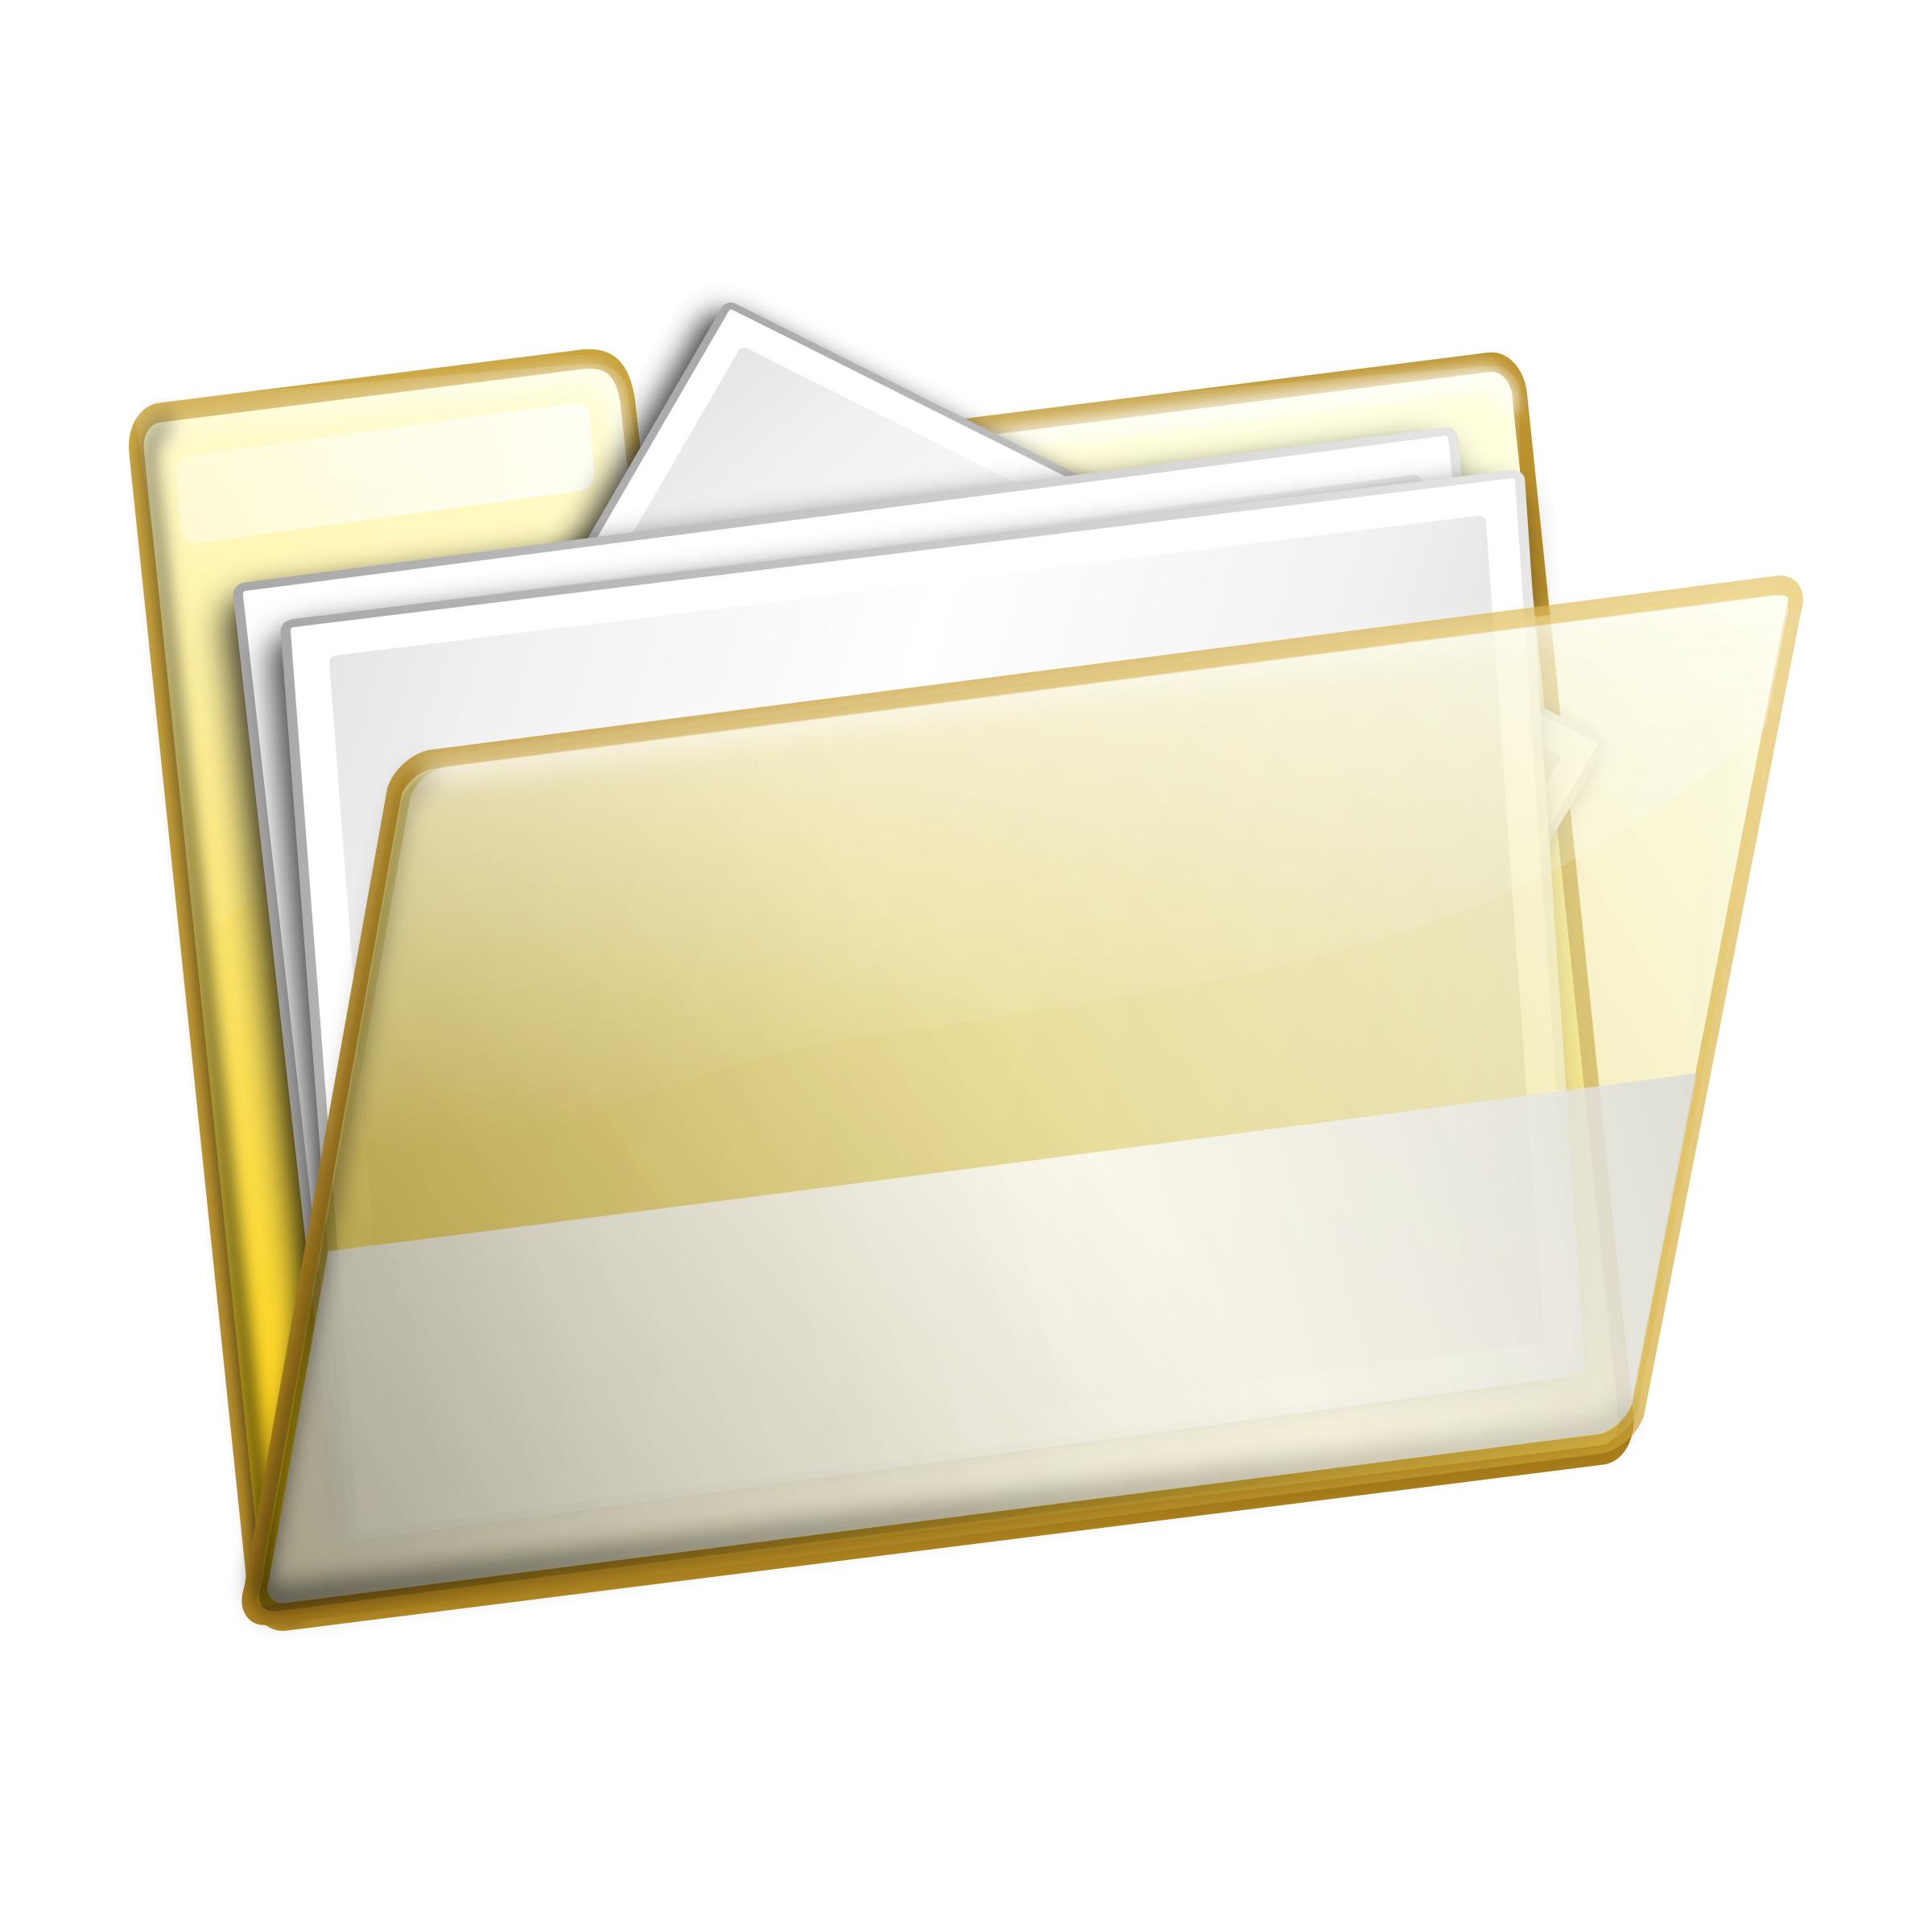 Simple Folder Documents png